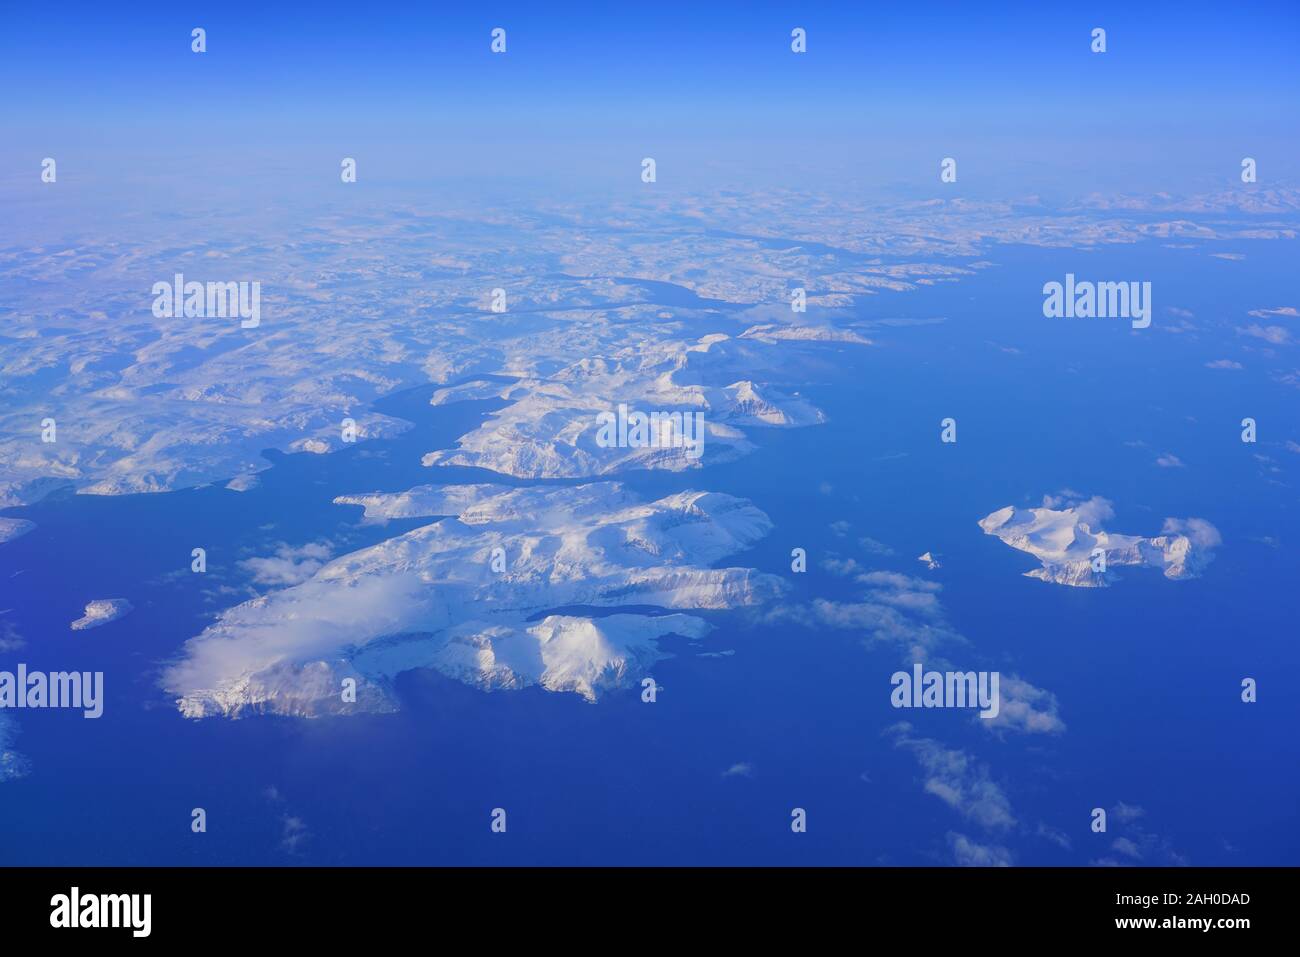 Aerial view of the Labrador Newfoundland area near Nutak and Nain, Canada, covered with ice and snow in winter Stock Photo